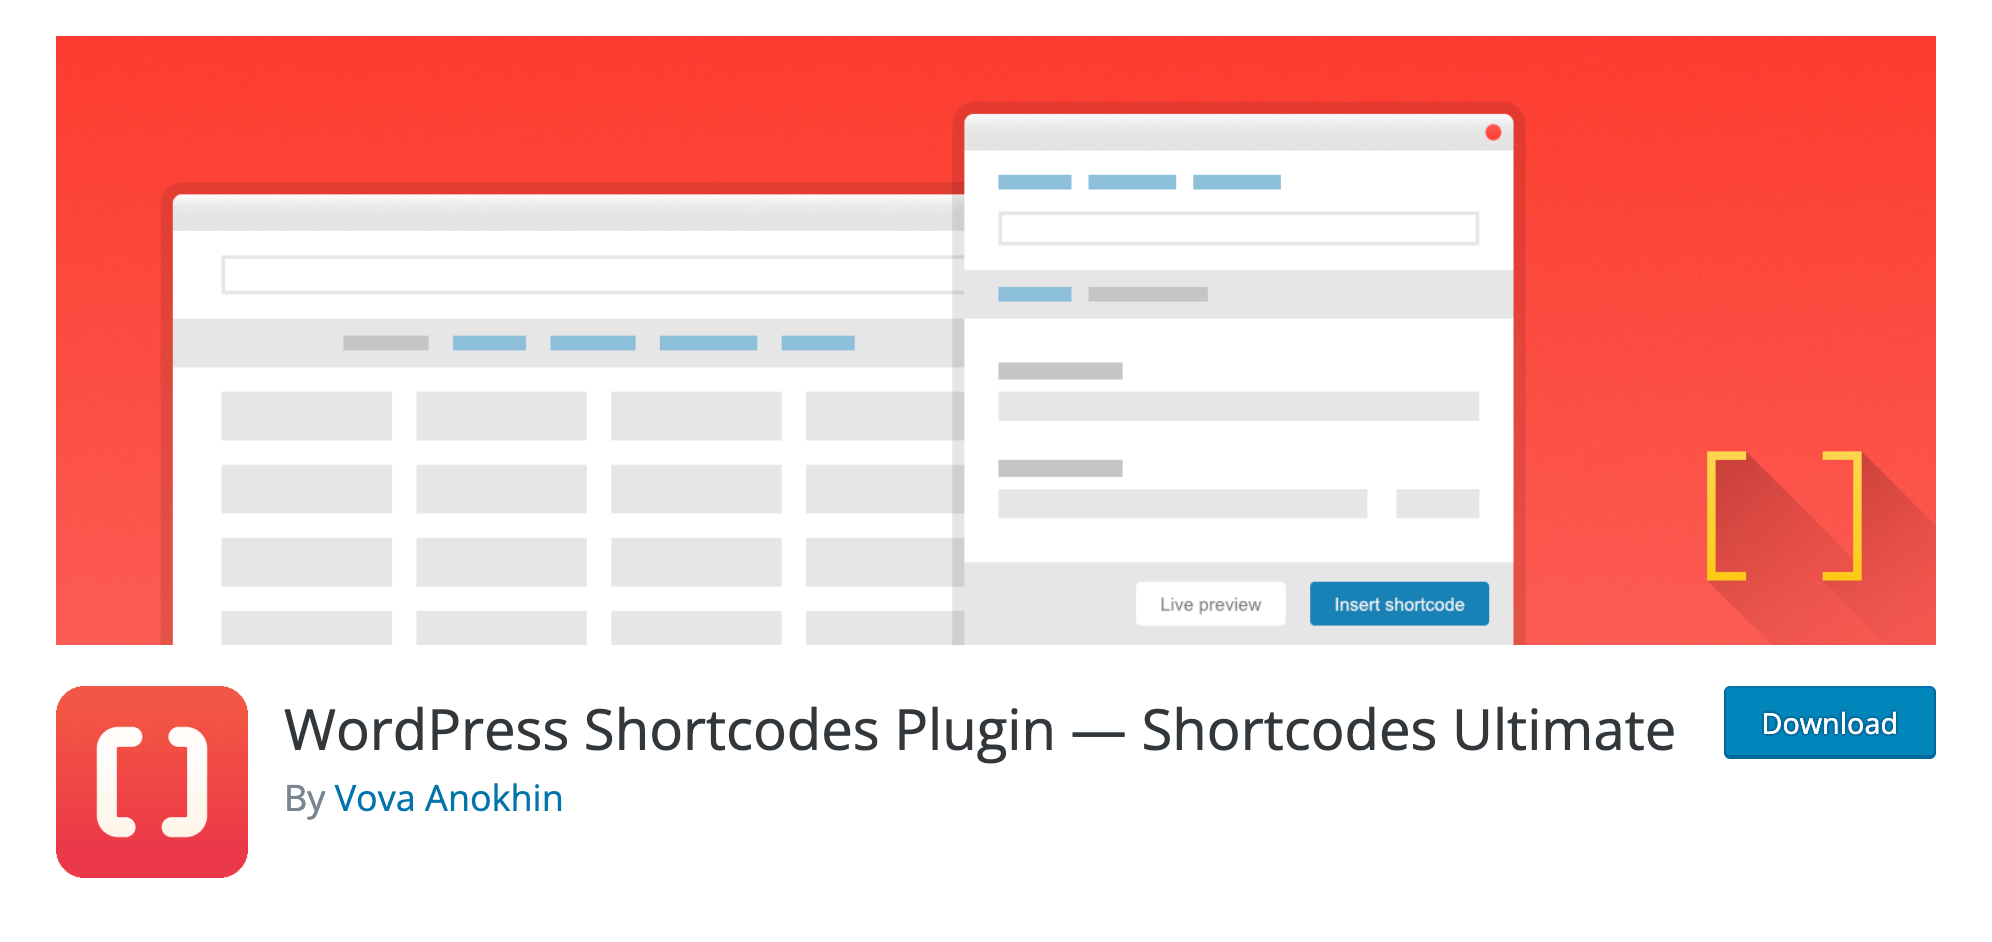 How to Add a Shortcode in WordPress: Step-by-Step Tutorial